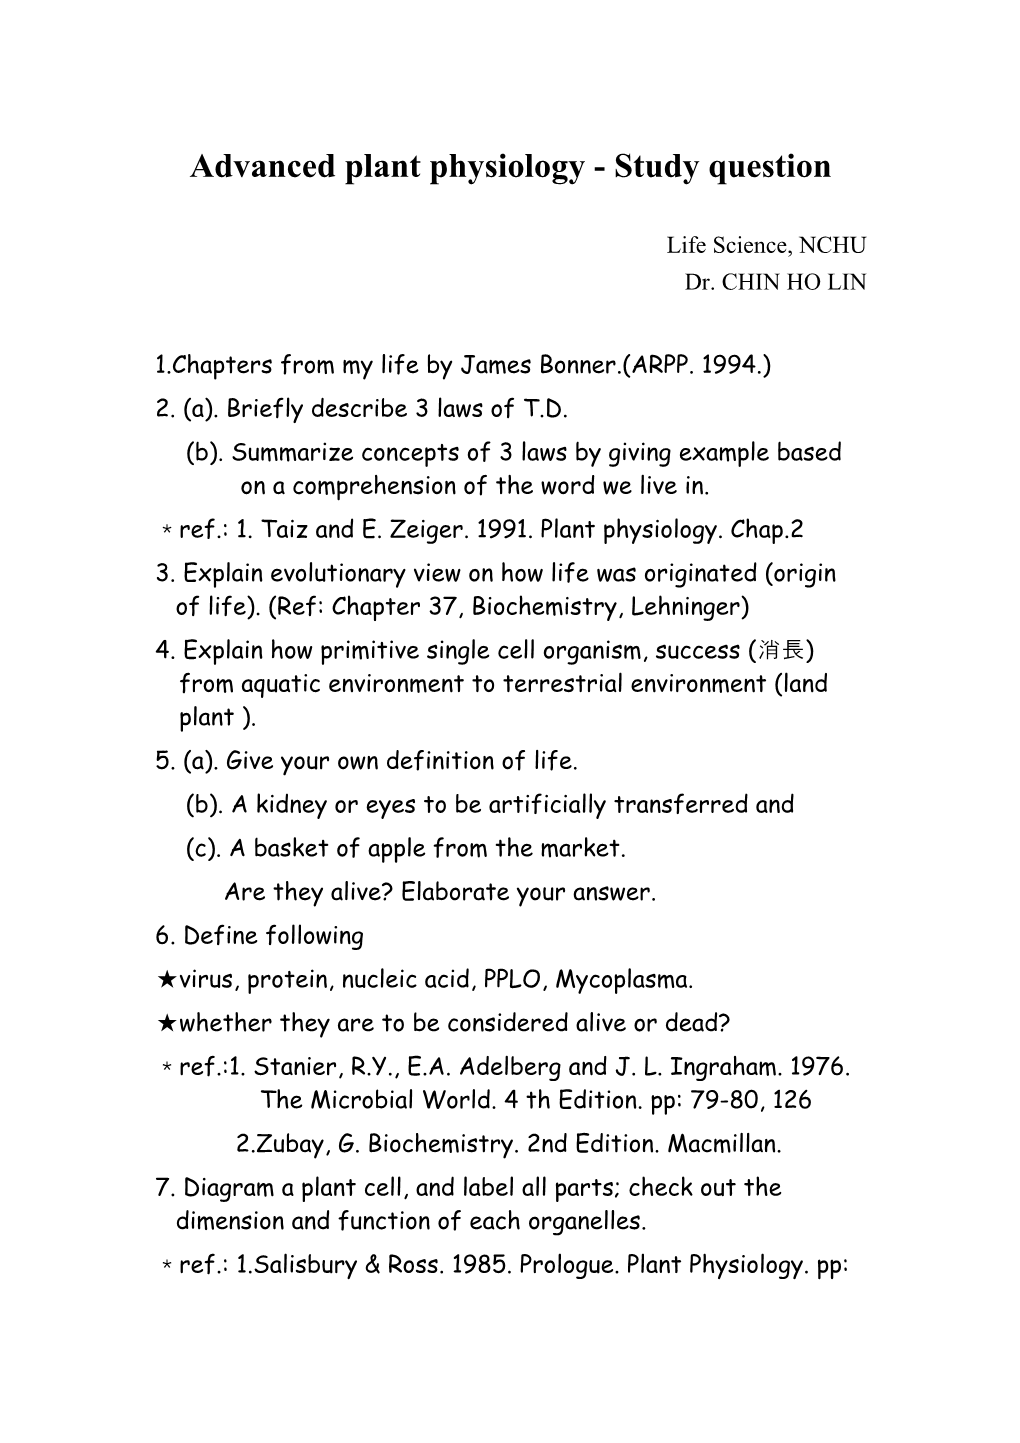 Advanced Plant Physiology - Study Question